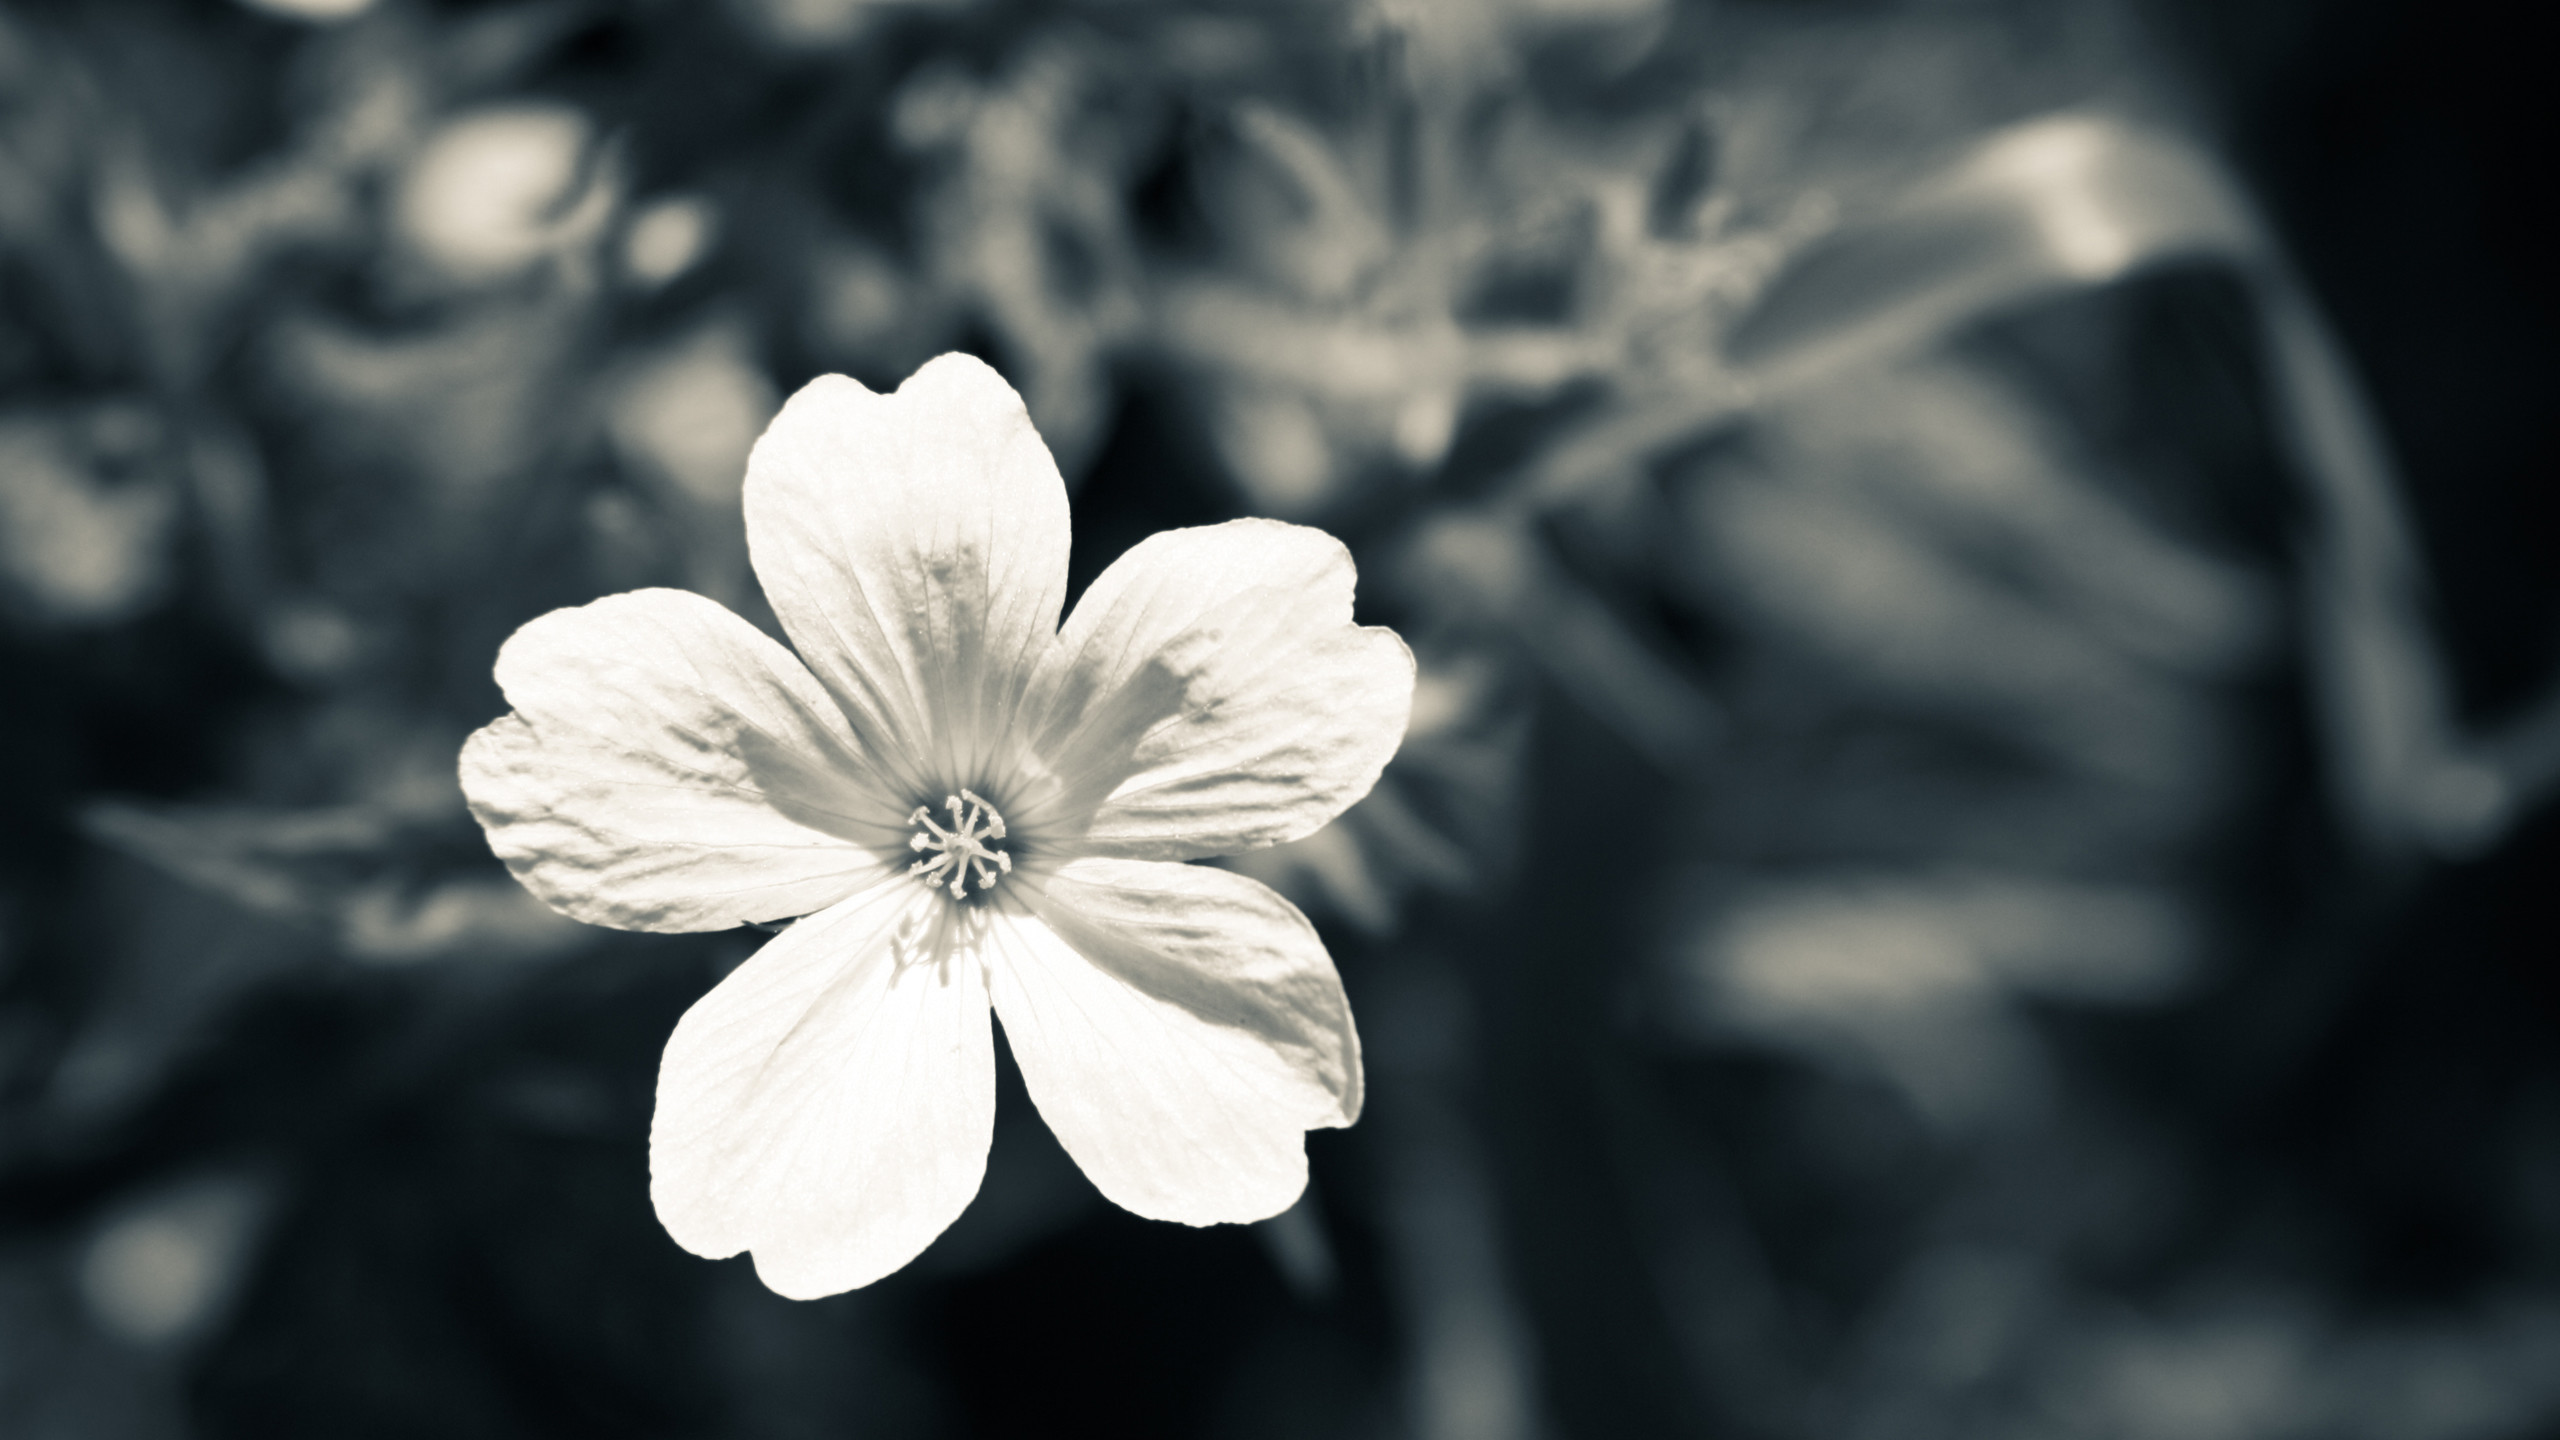 2560x1440 Nature Flowers Black And White